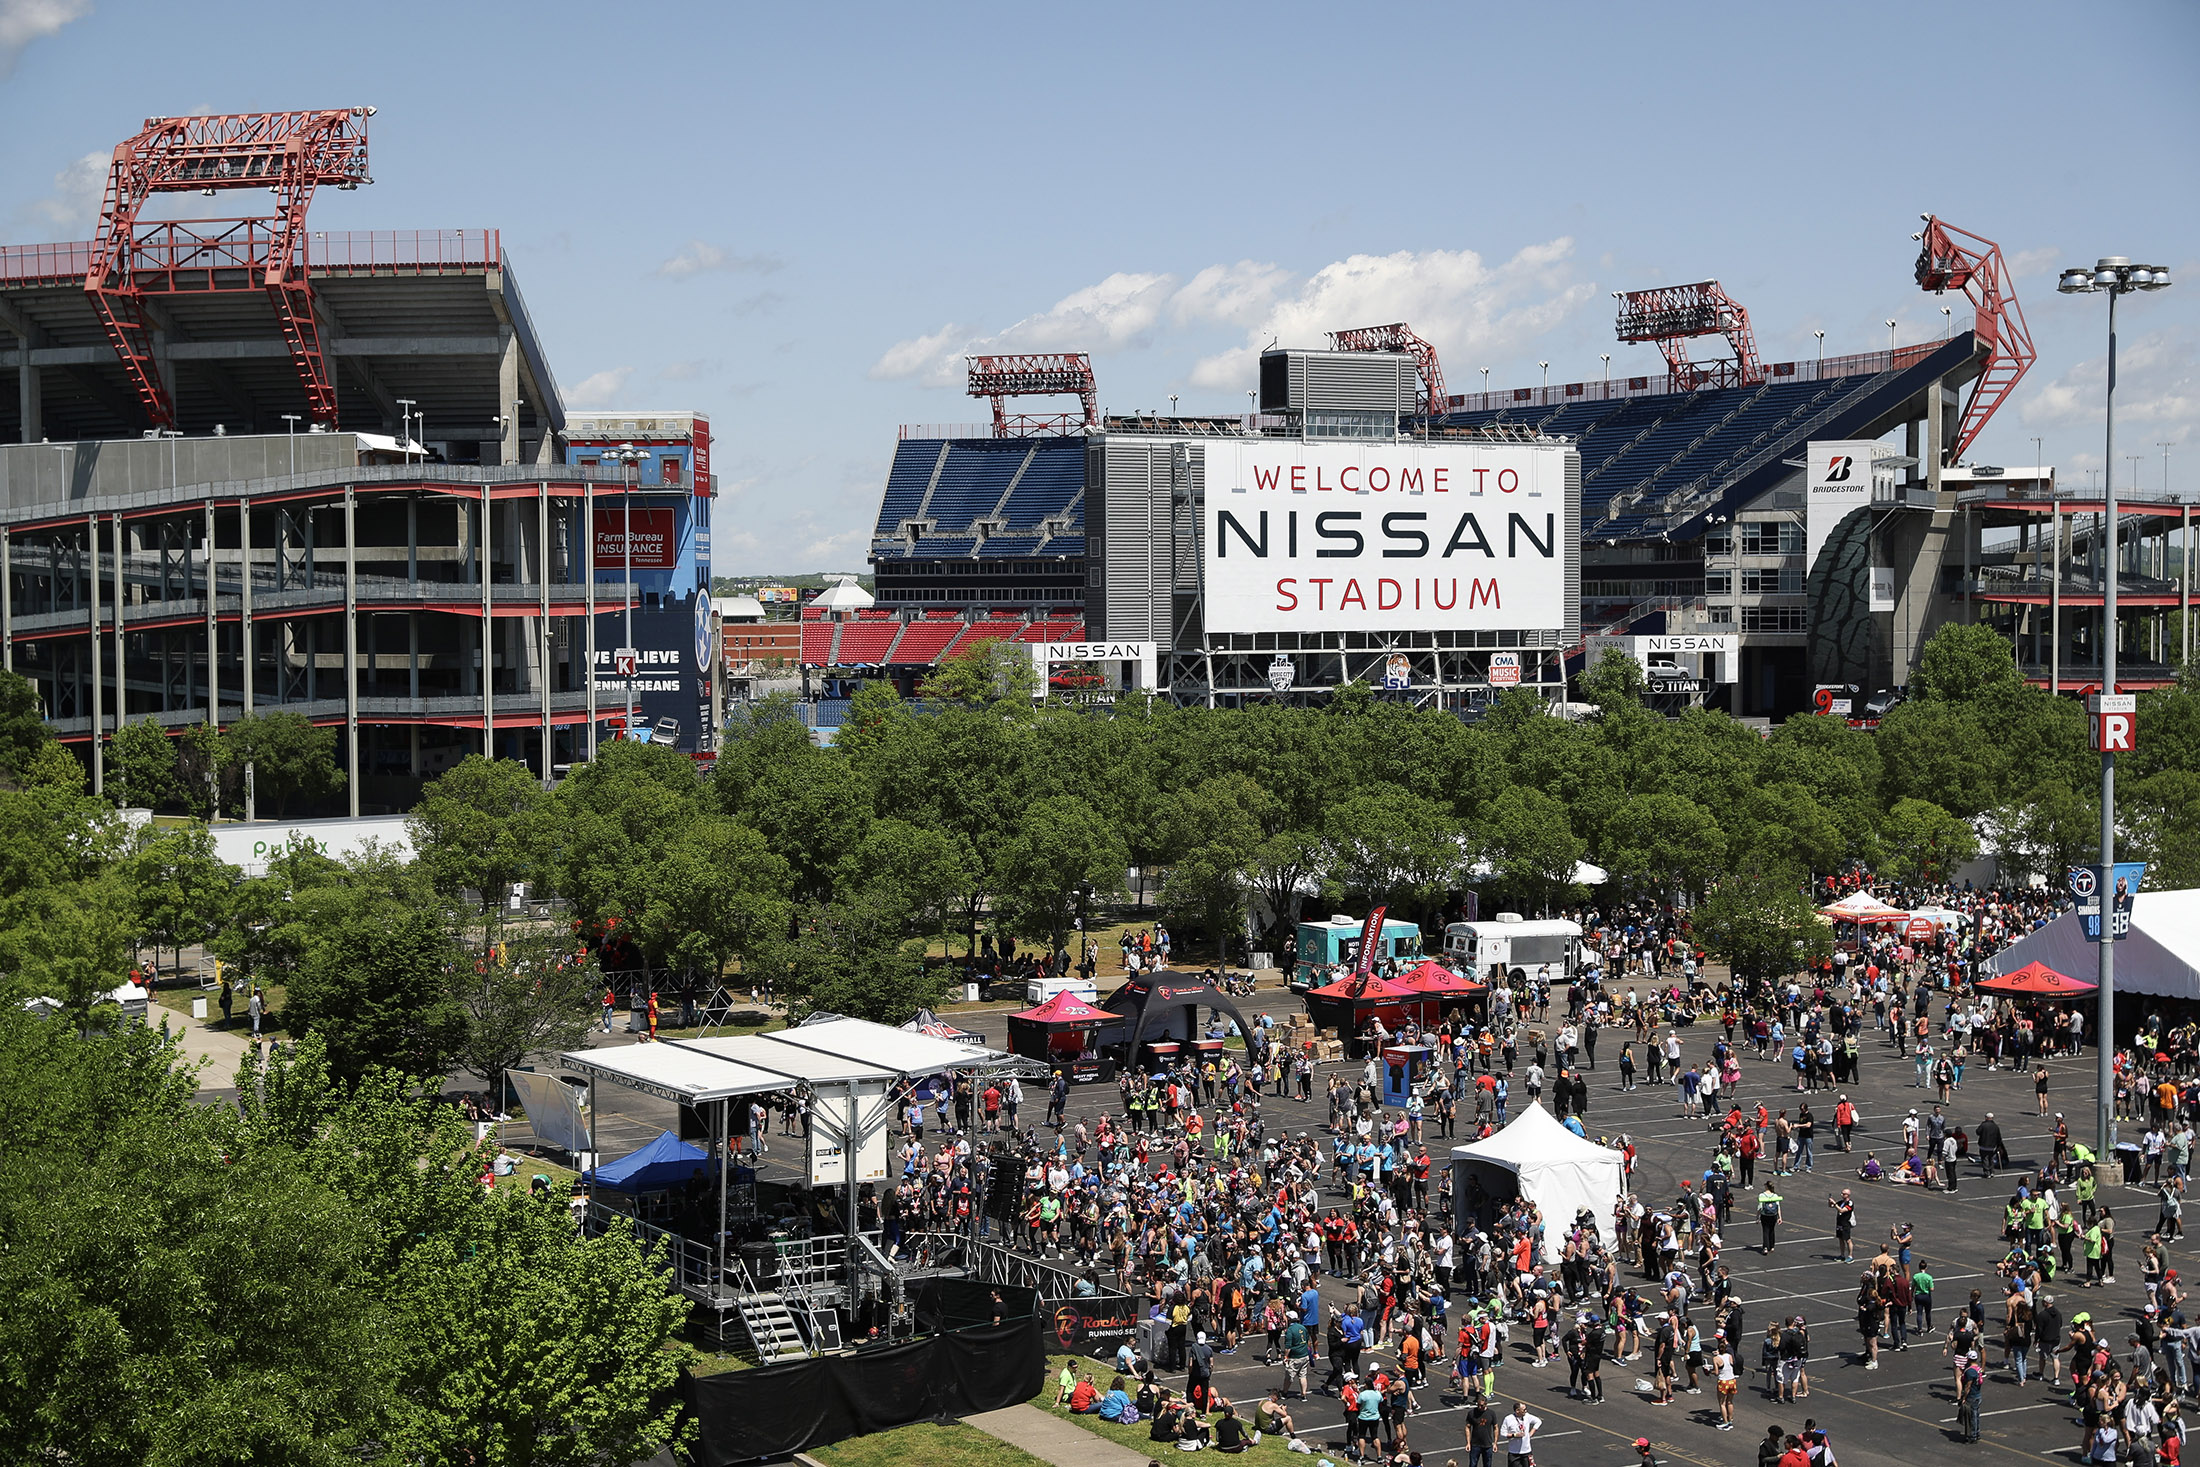 Tennessee Titans on X: Non-profits can raise $ working at LP